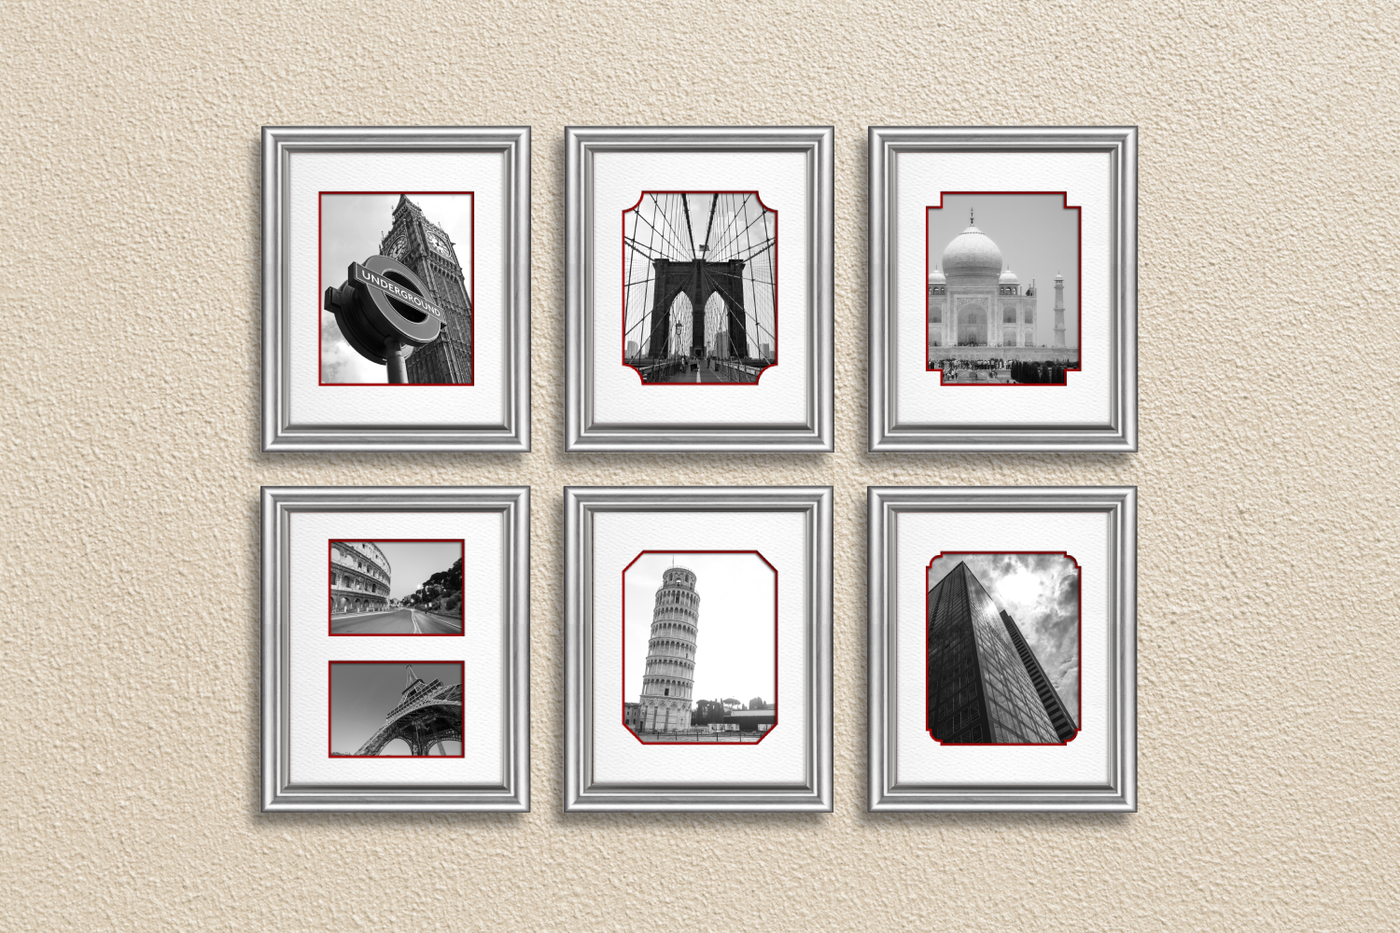 Six framed photos, each with a different photo mat shape